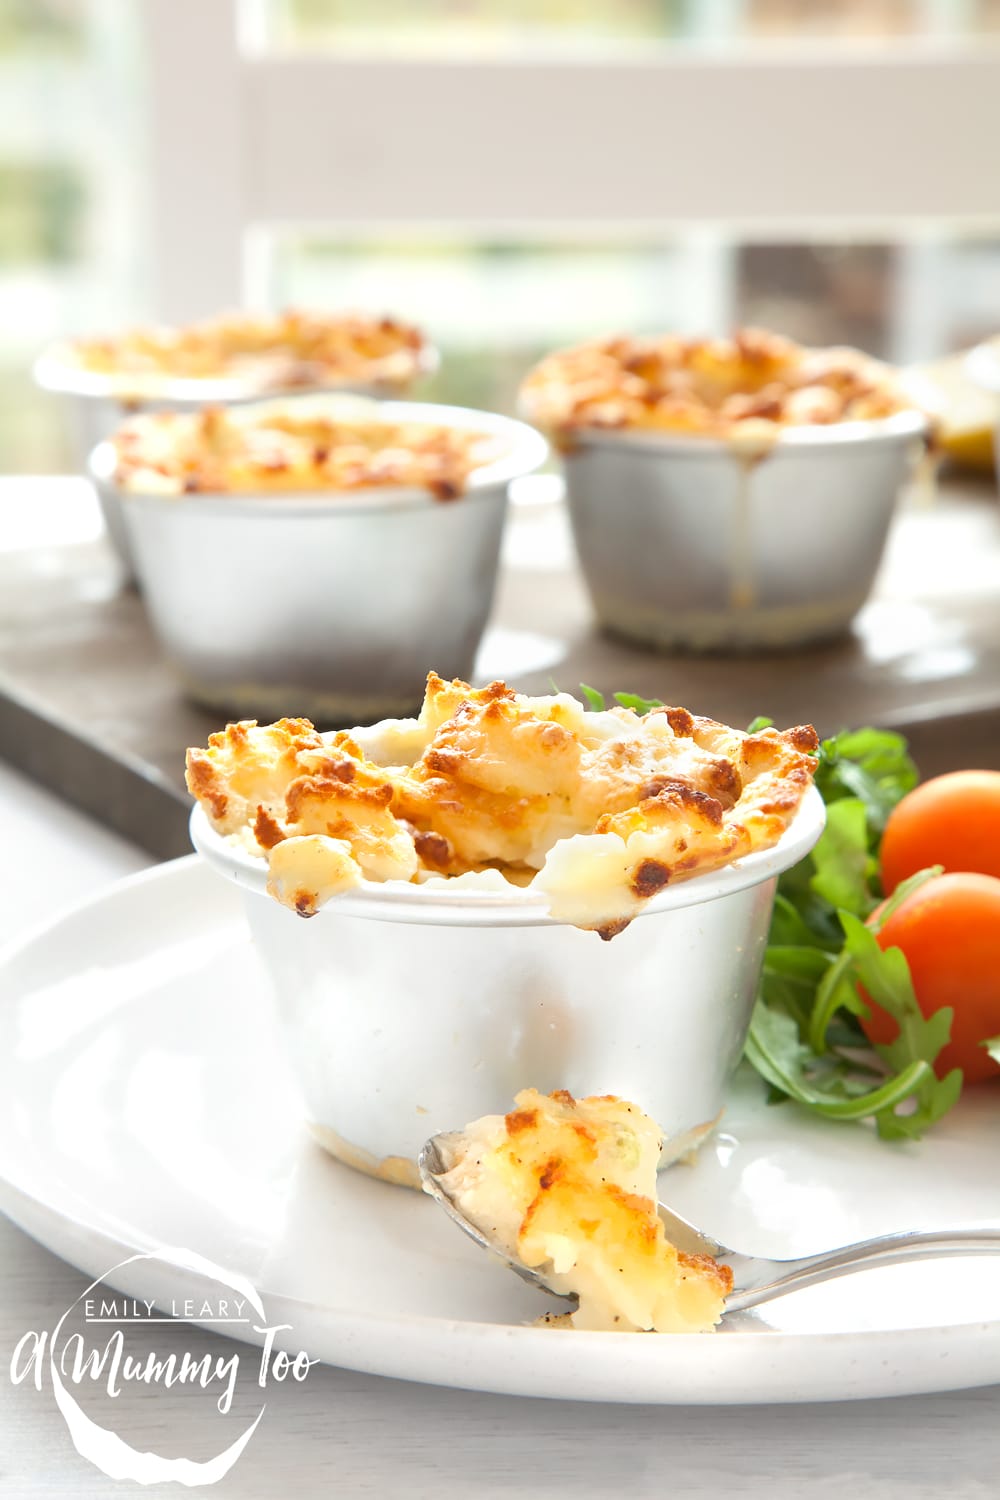 These mini cheesy fish pies are made with frozen fish pie mix, peas, cheese sauce and mashed potato